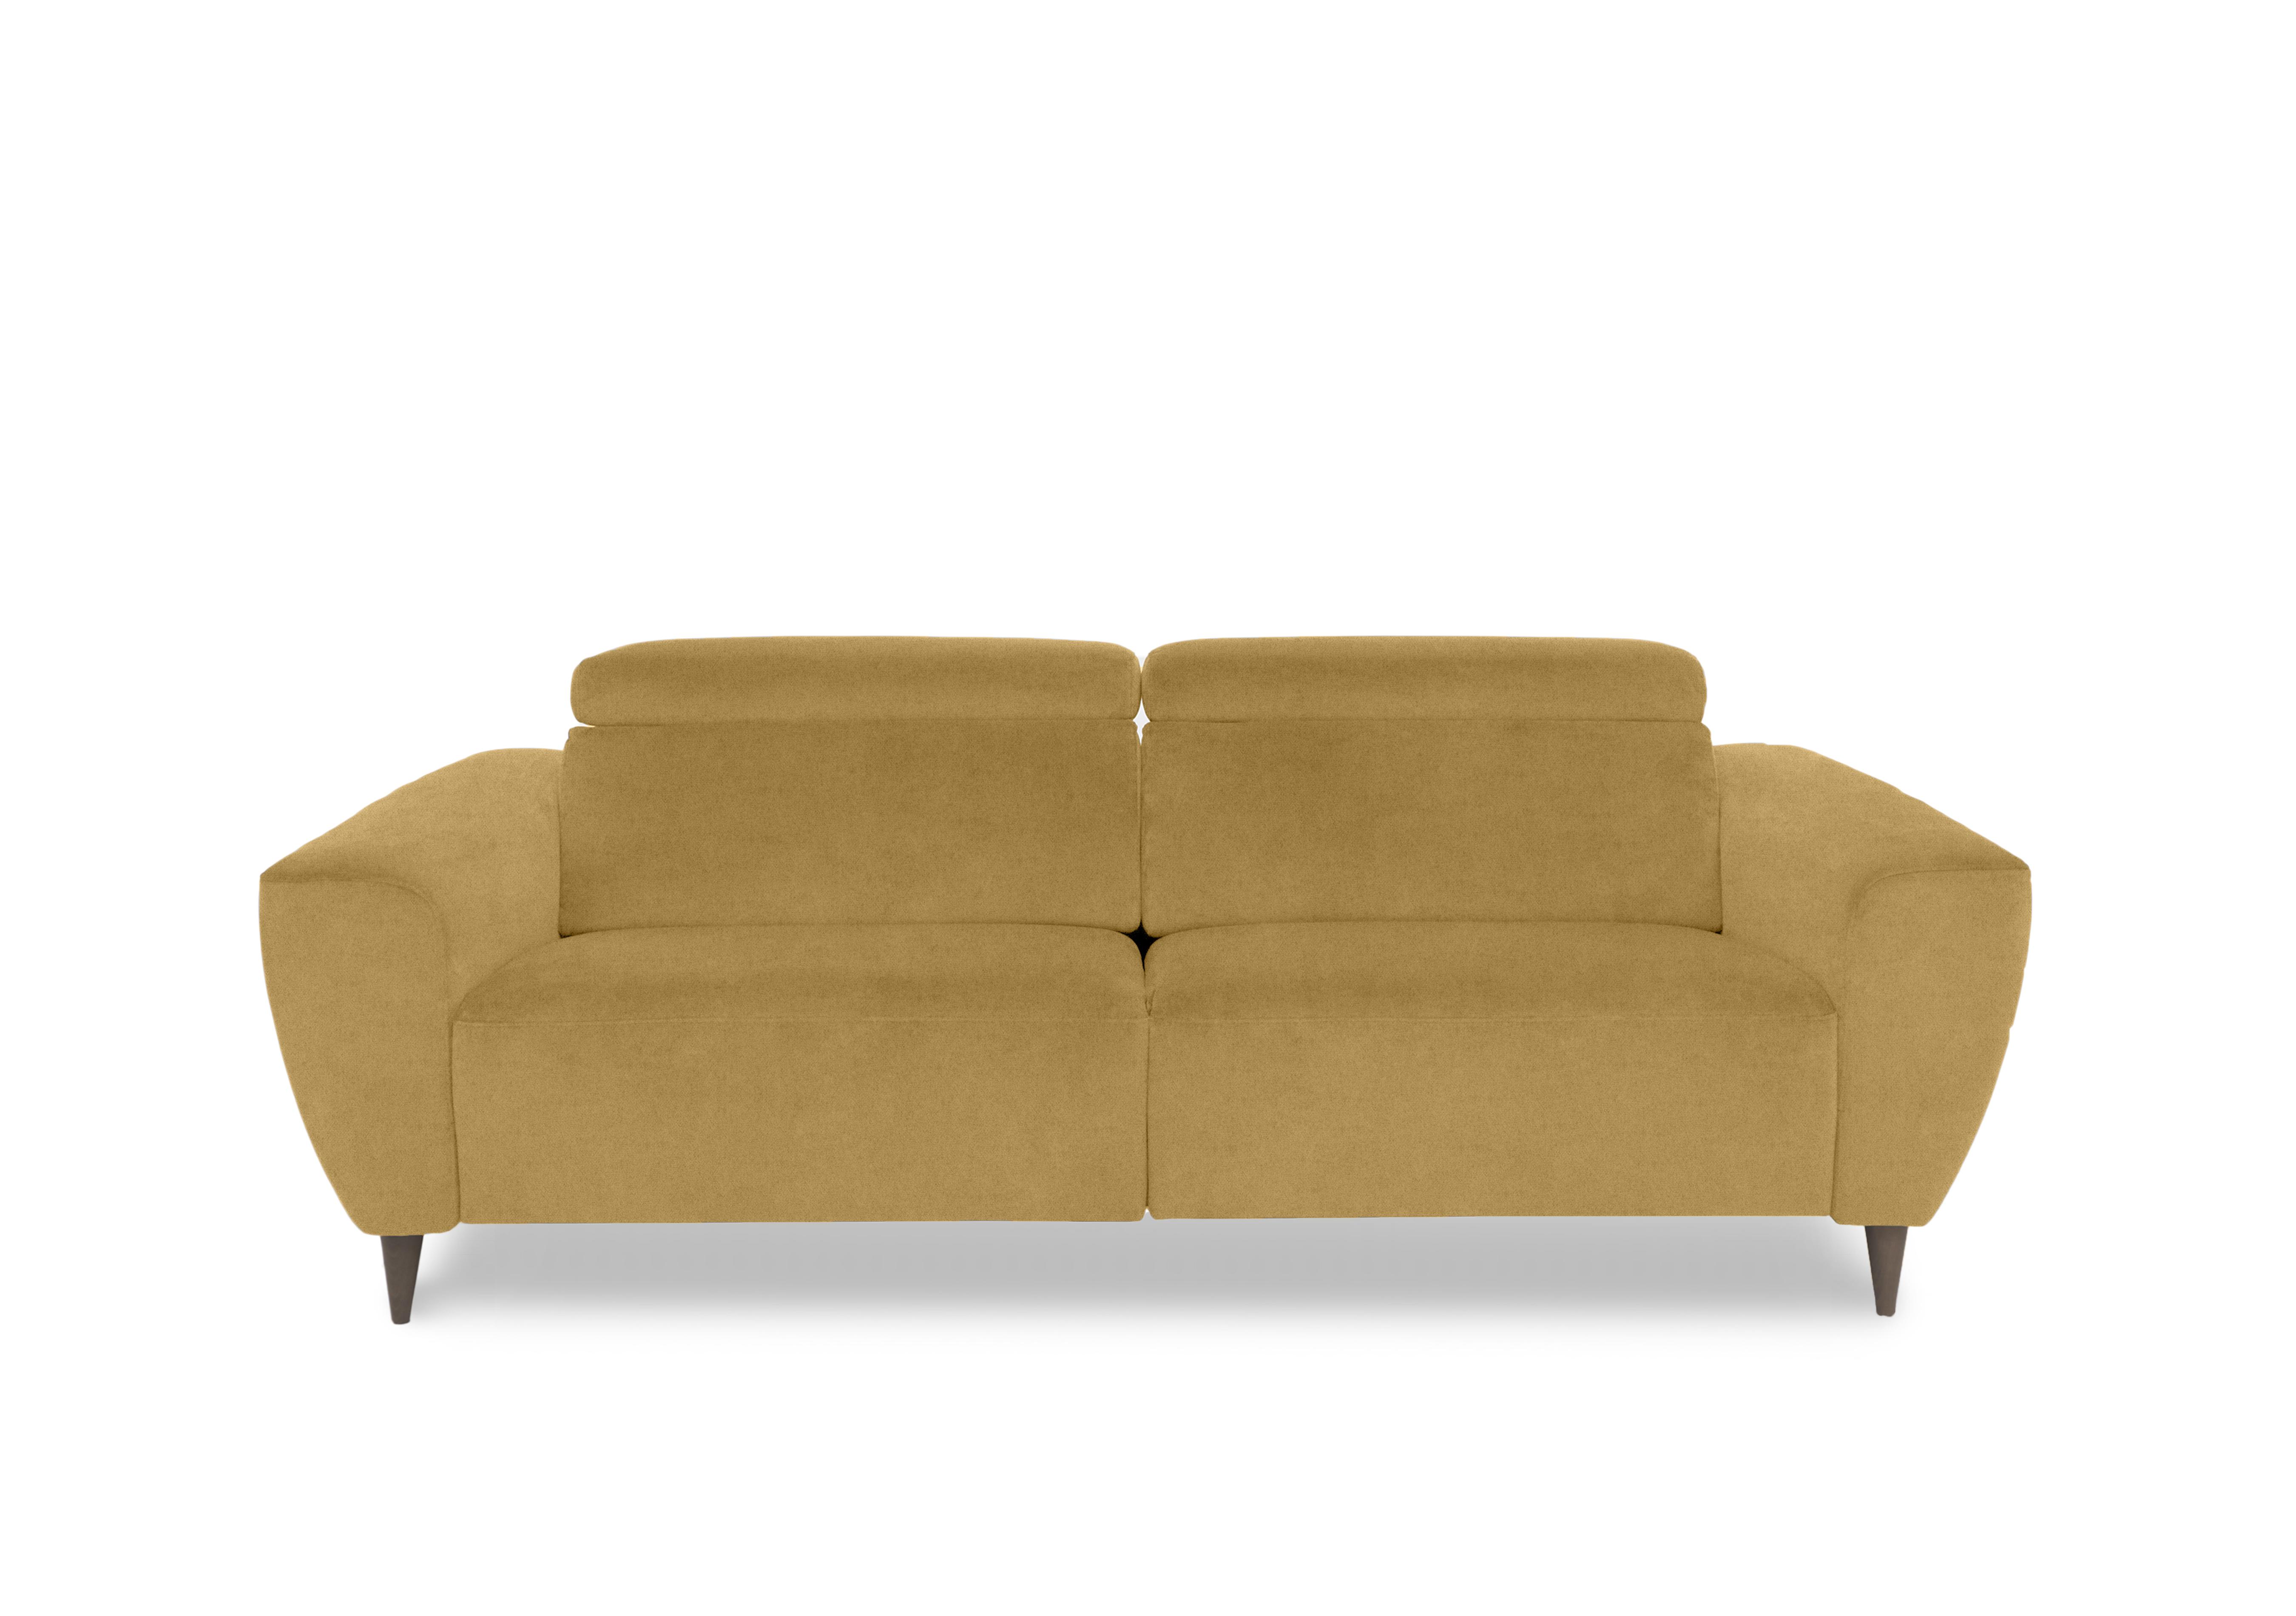 Milano 3 Seater Fabric Sofa in Fuente Mostaza To Ft on Furniture Village